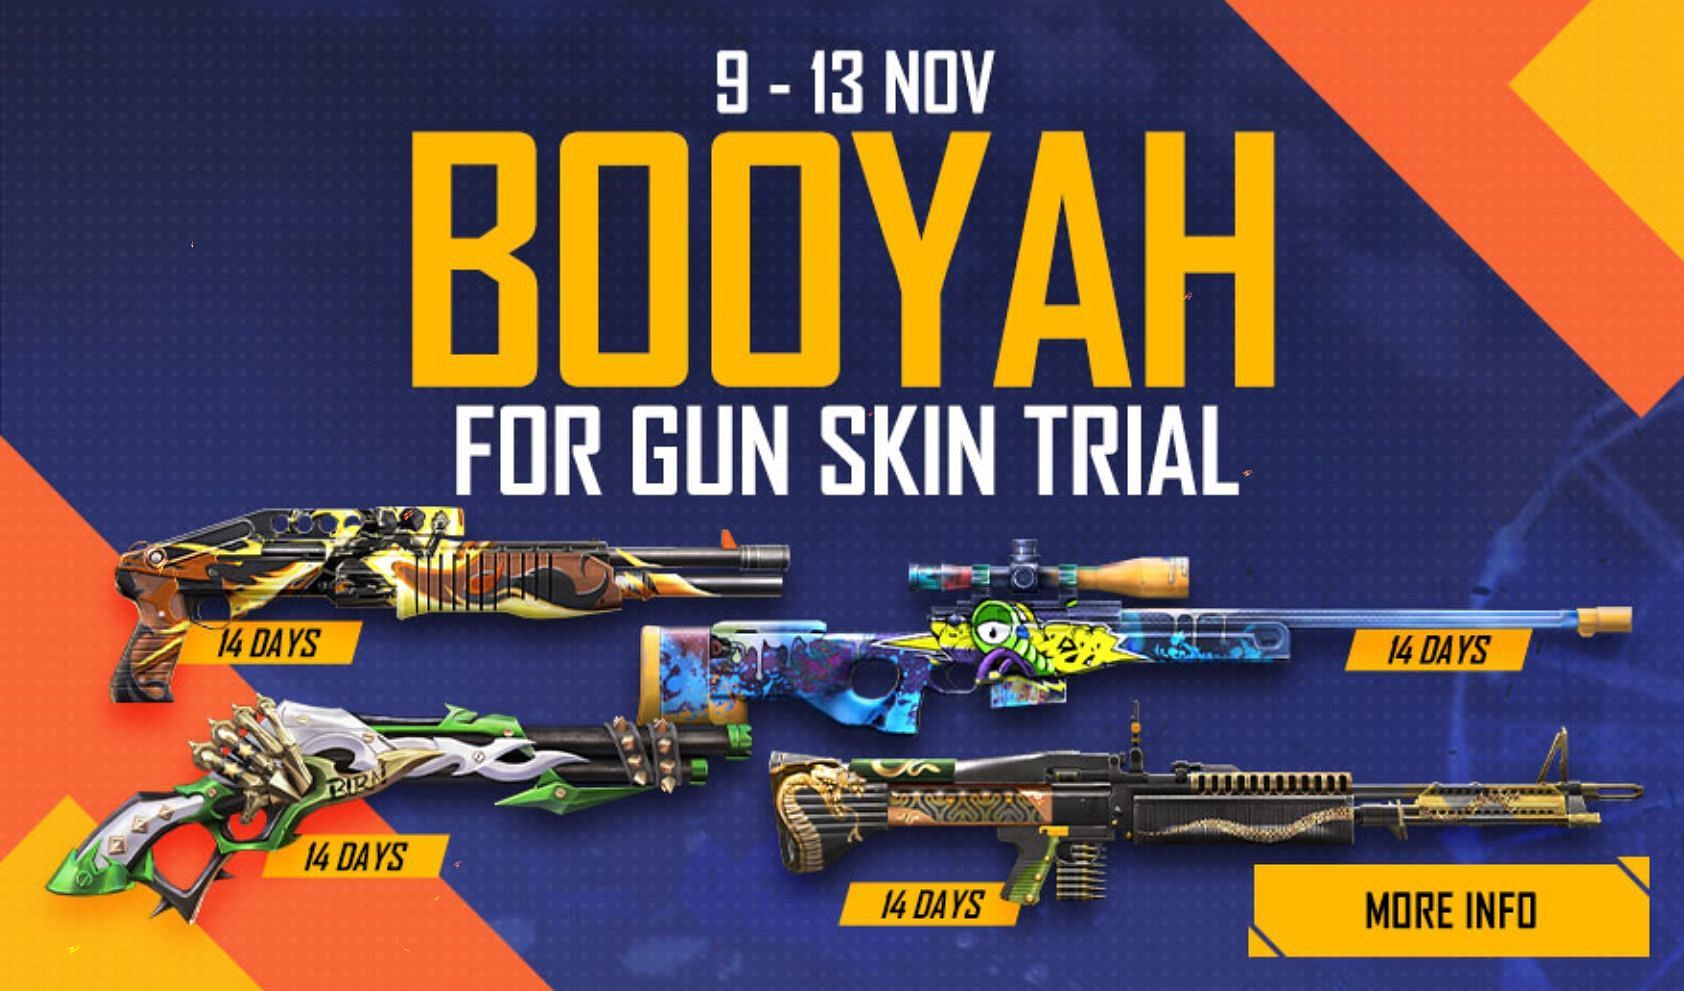 The event will be available until 13 November (Image via Free FIre)